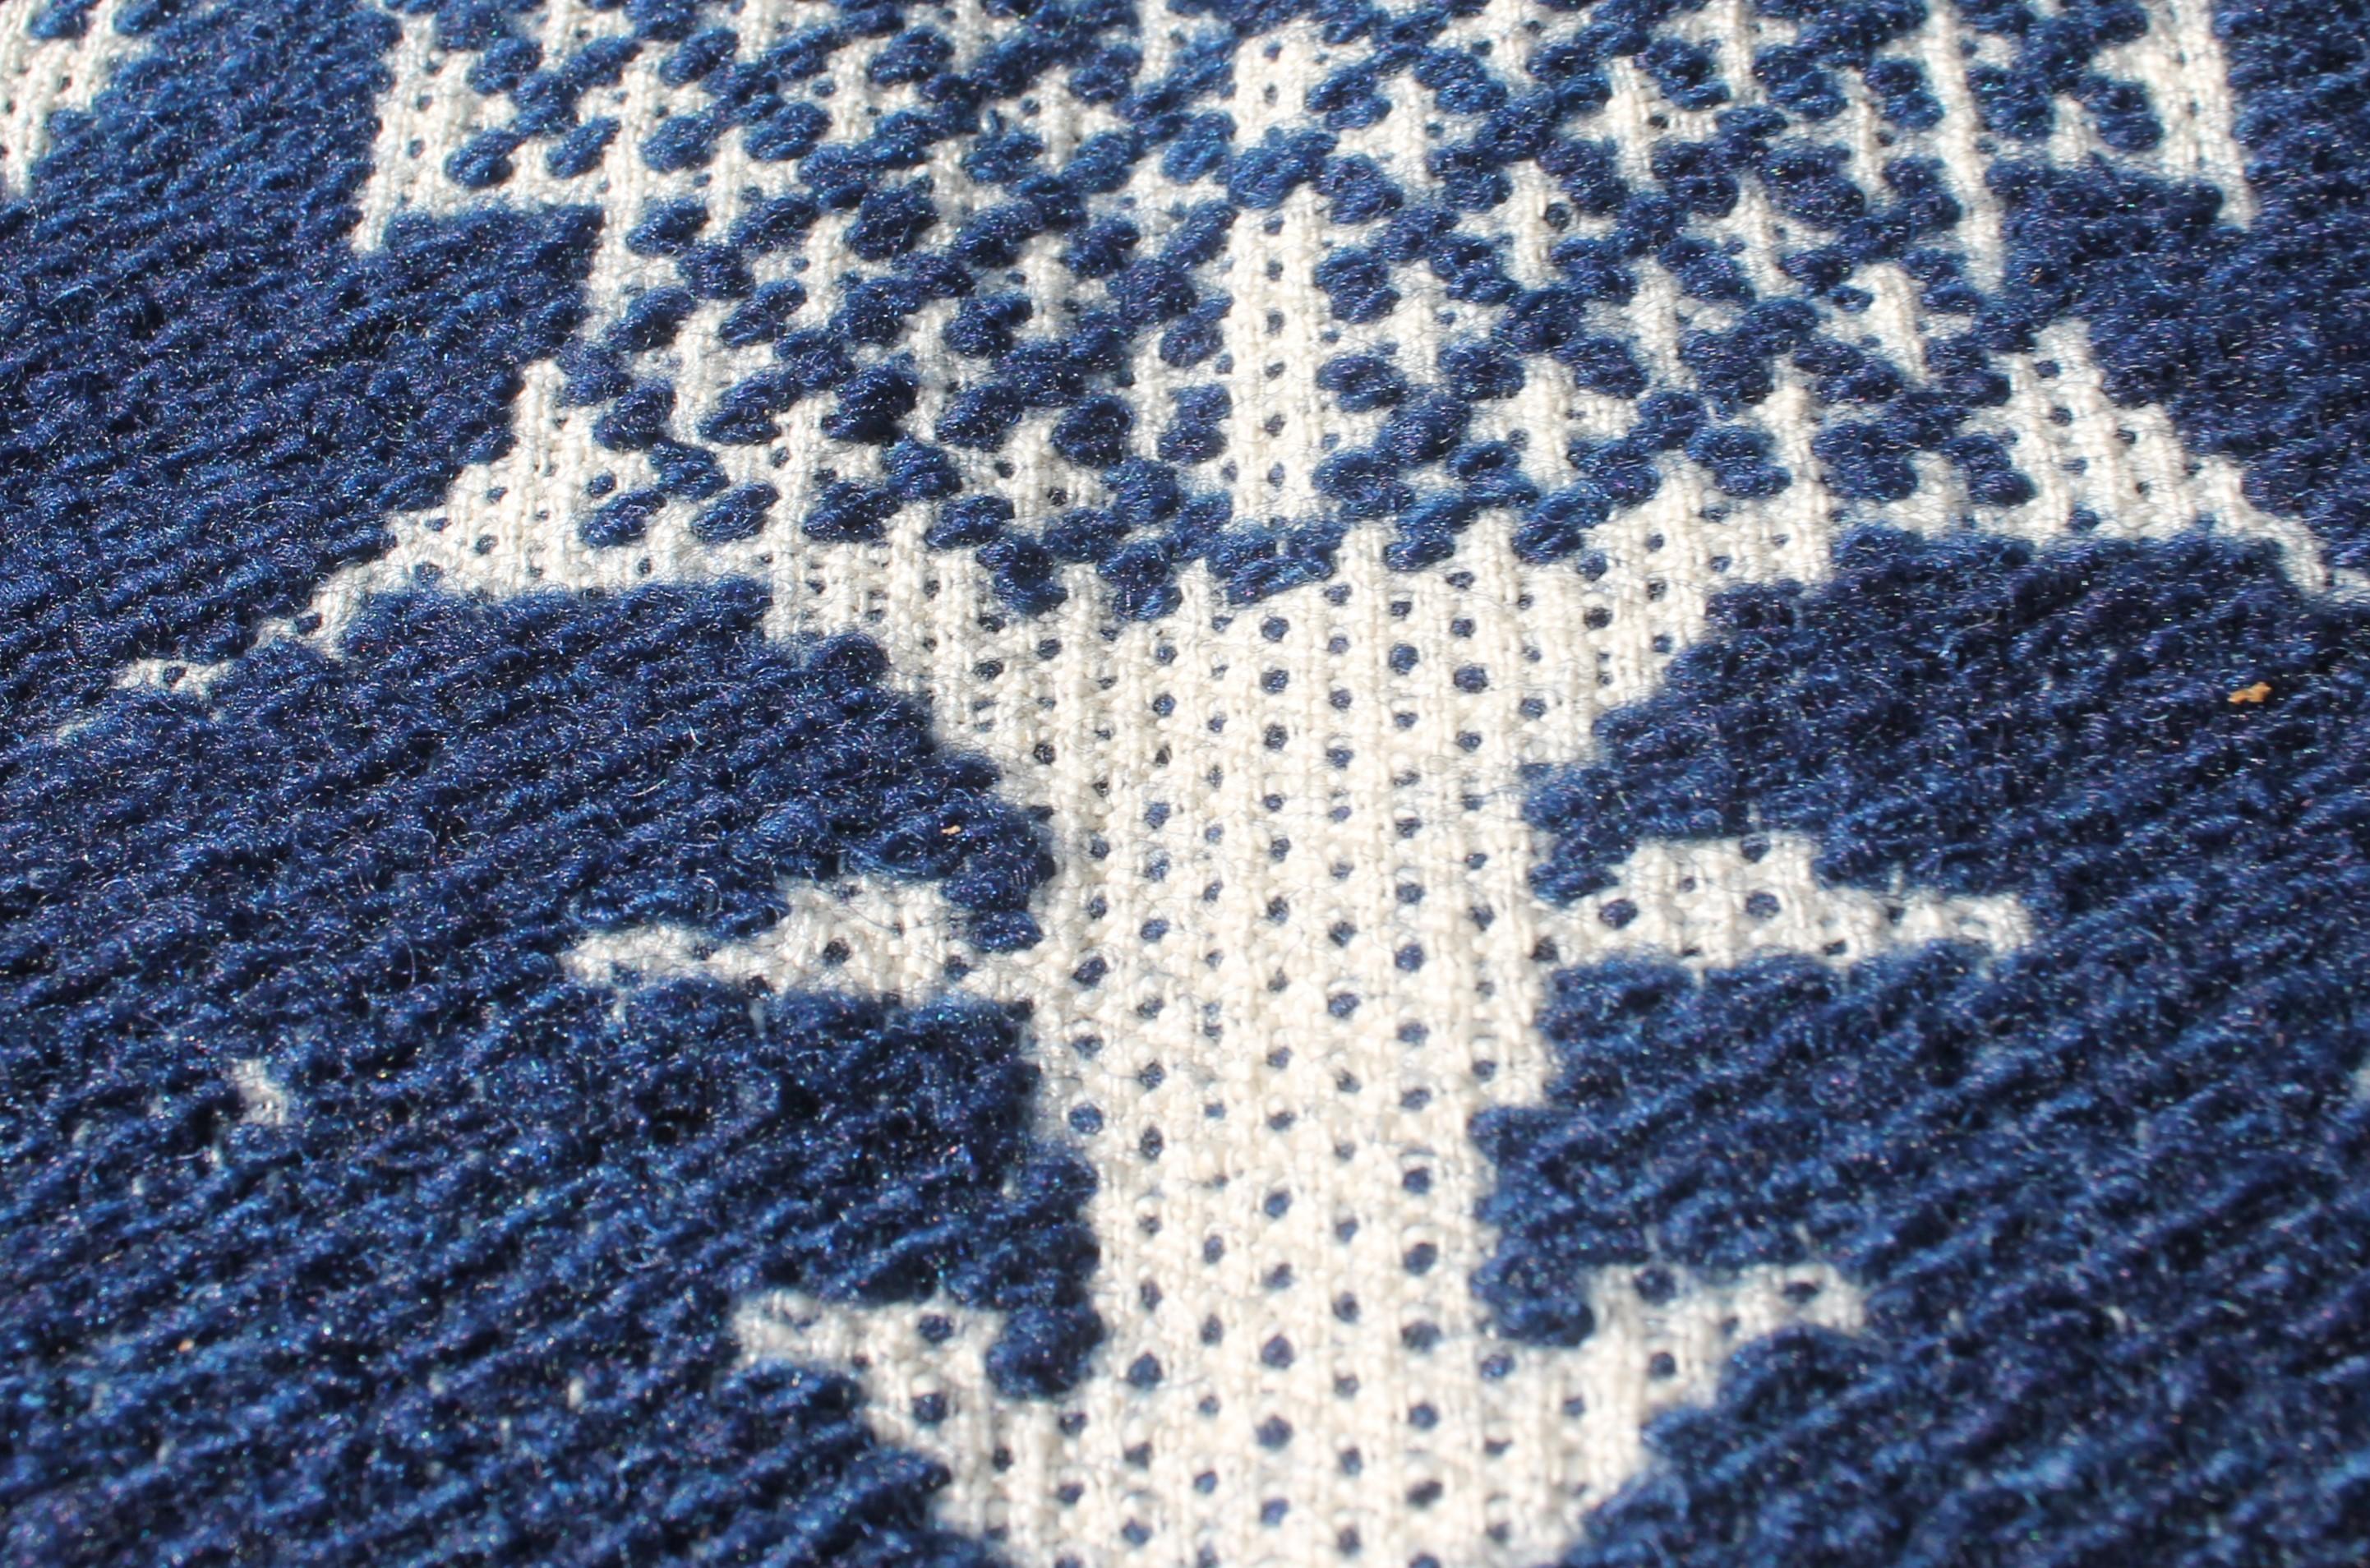 Hand-Crafted 19Thc Blue & White Woven Jacquard Coverlet From Pennsylvania For Sale